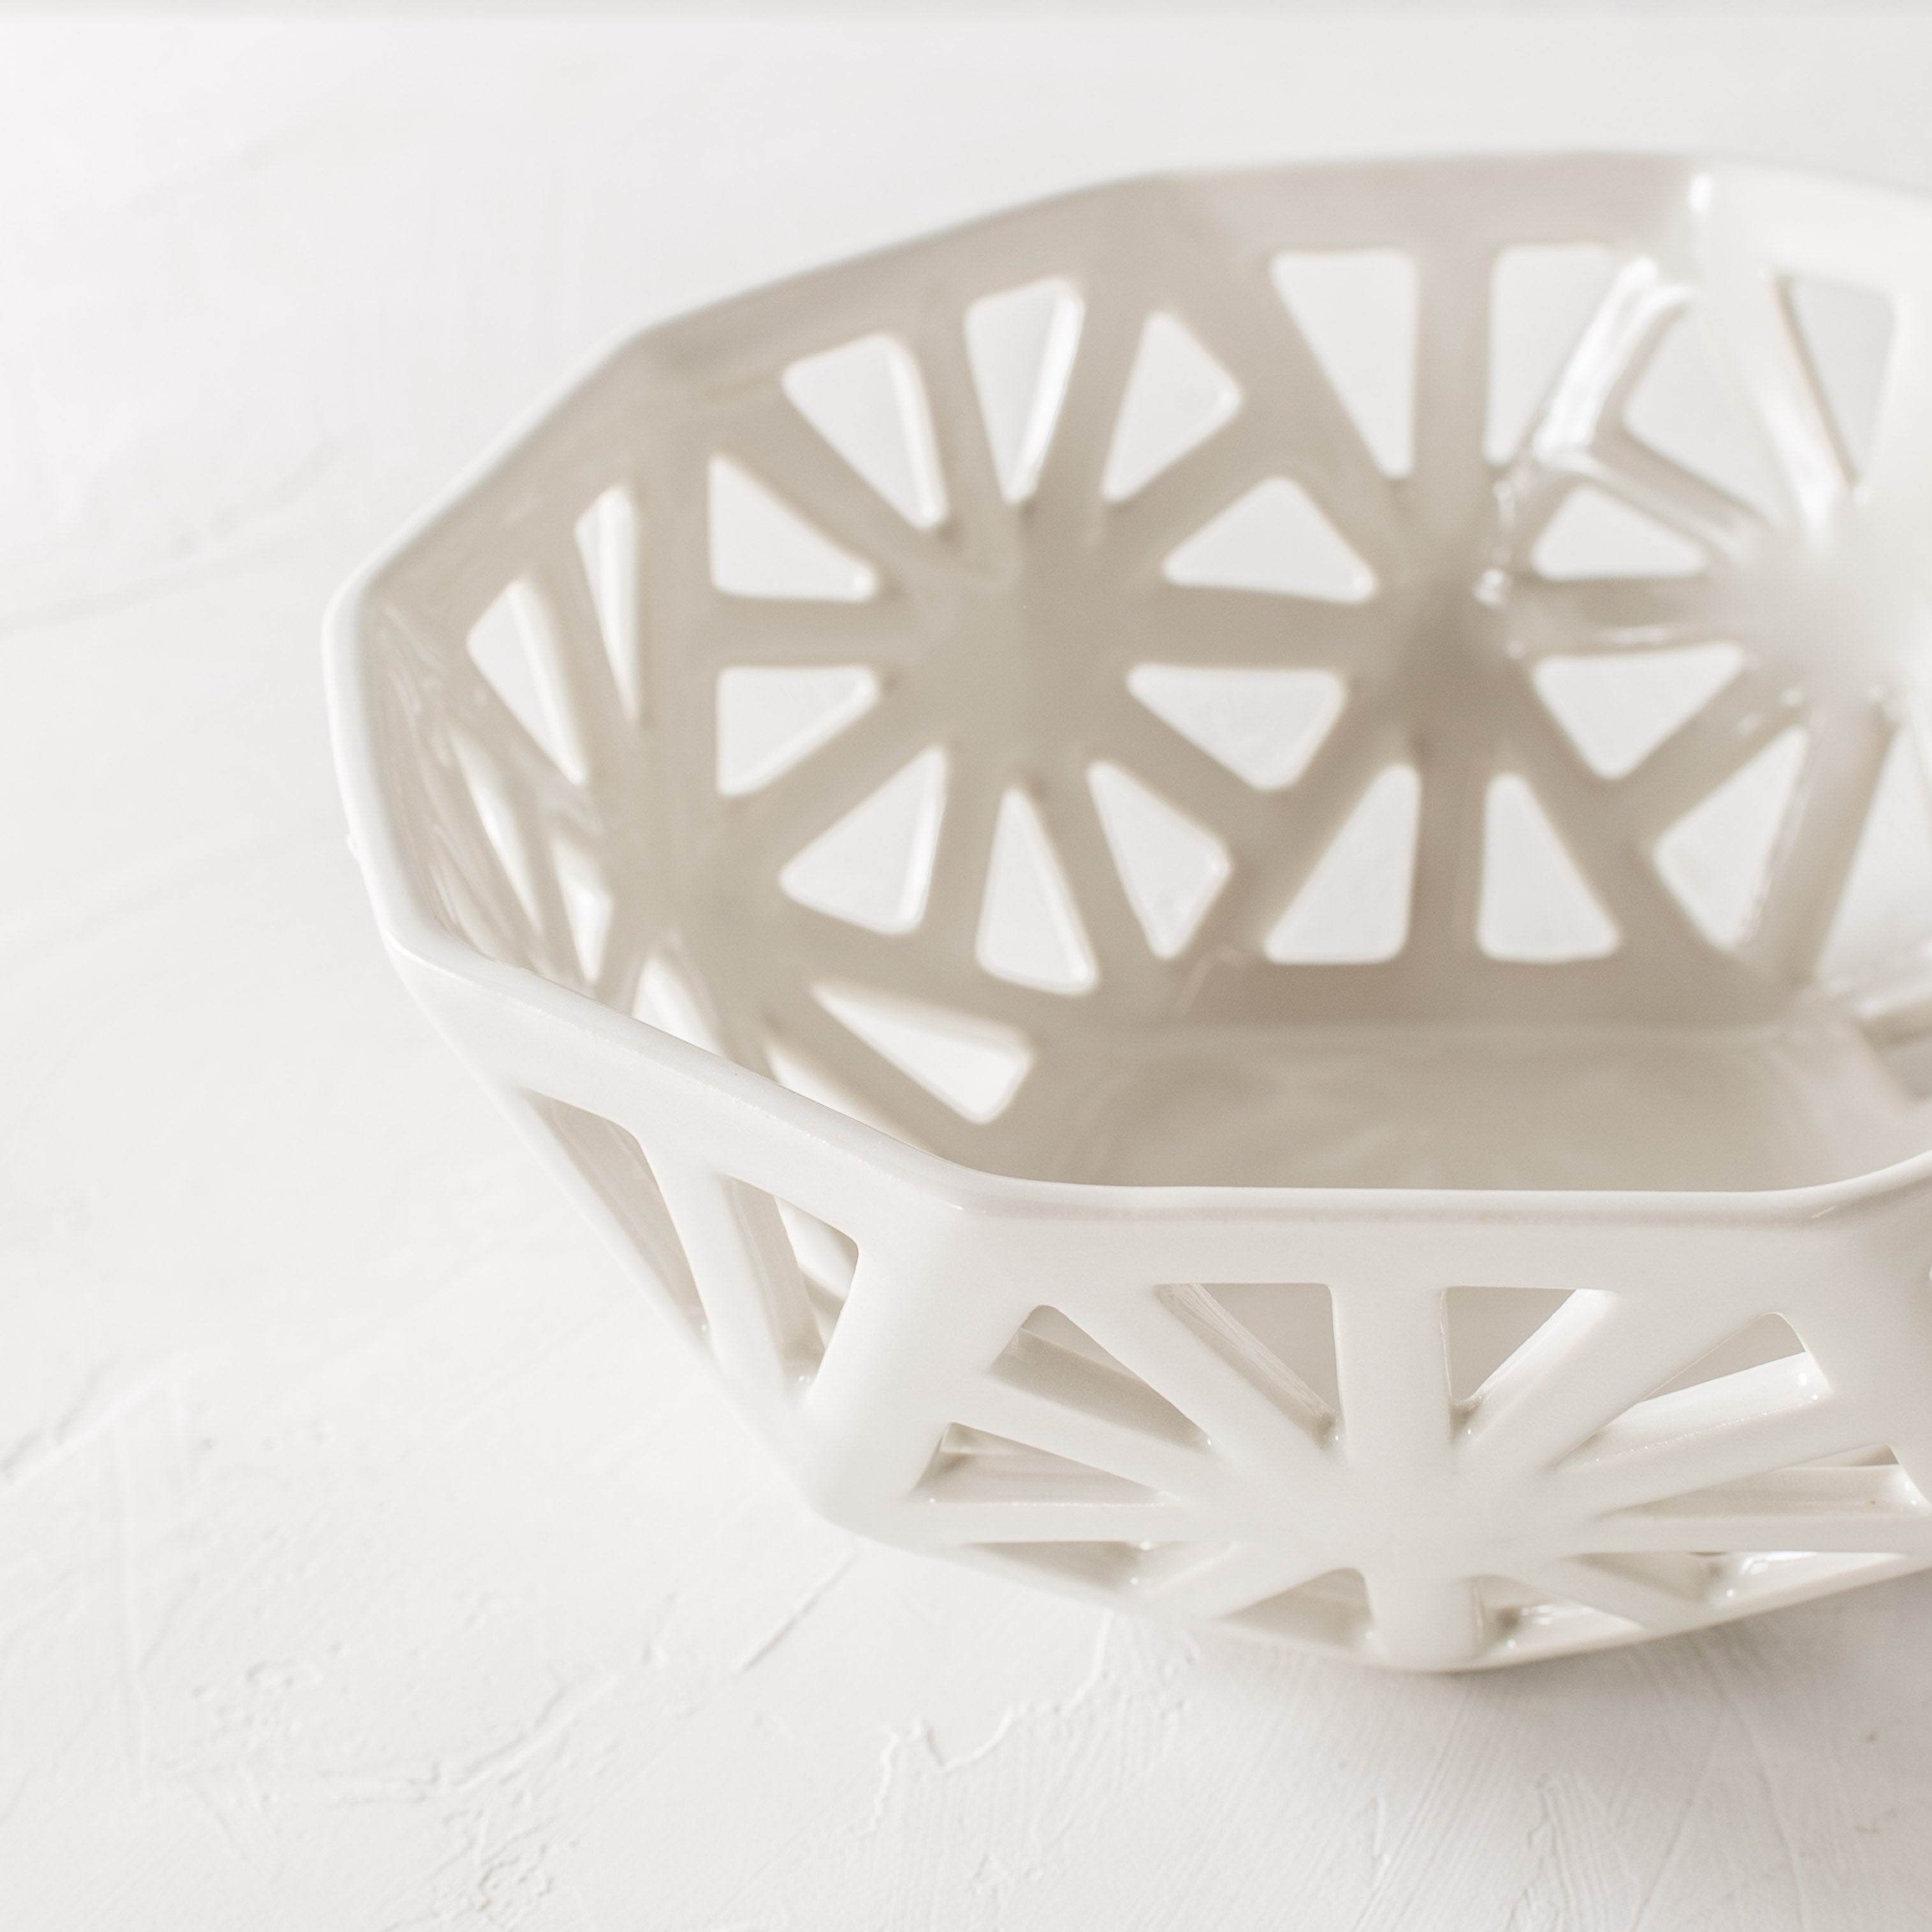 White geometric fruit bowl. Pentagon carved design with additional carved designs in the shape of slim right angle triangles. Close up detail images focusing on carving design. Designed and sold by Convivial Production, Kansas City Ceramics